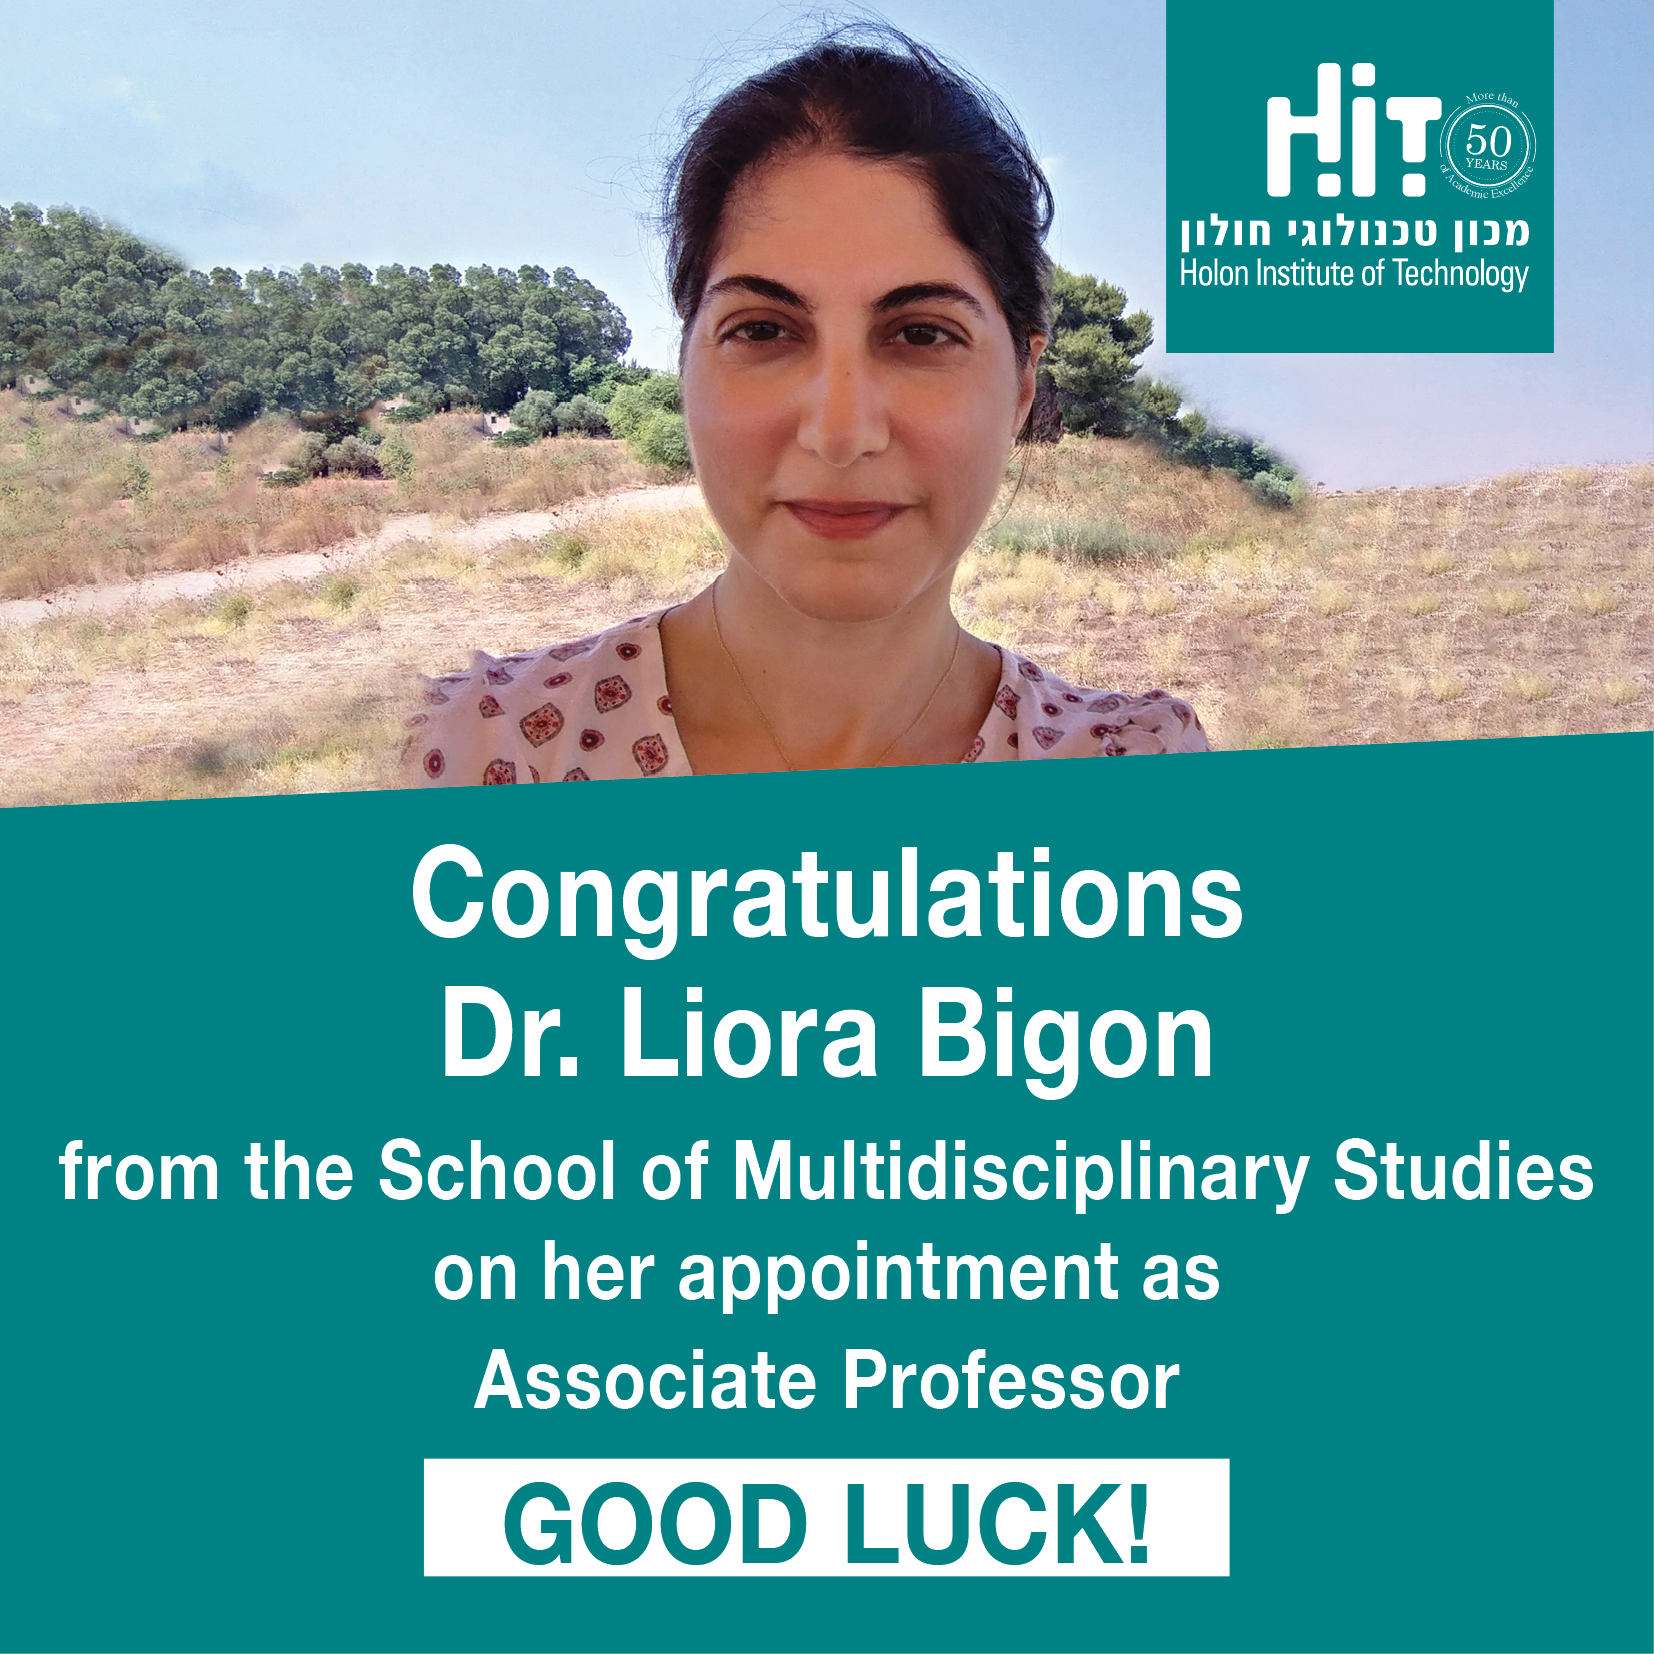 Congratulations to Dr. Liora Begun from the School of Multidisciplinary Studies for receiving the degree of Associate Professor